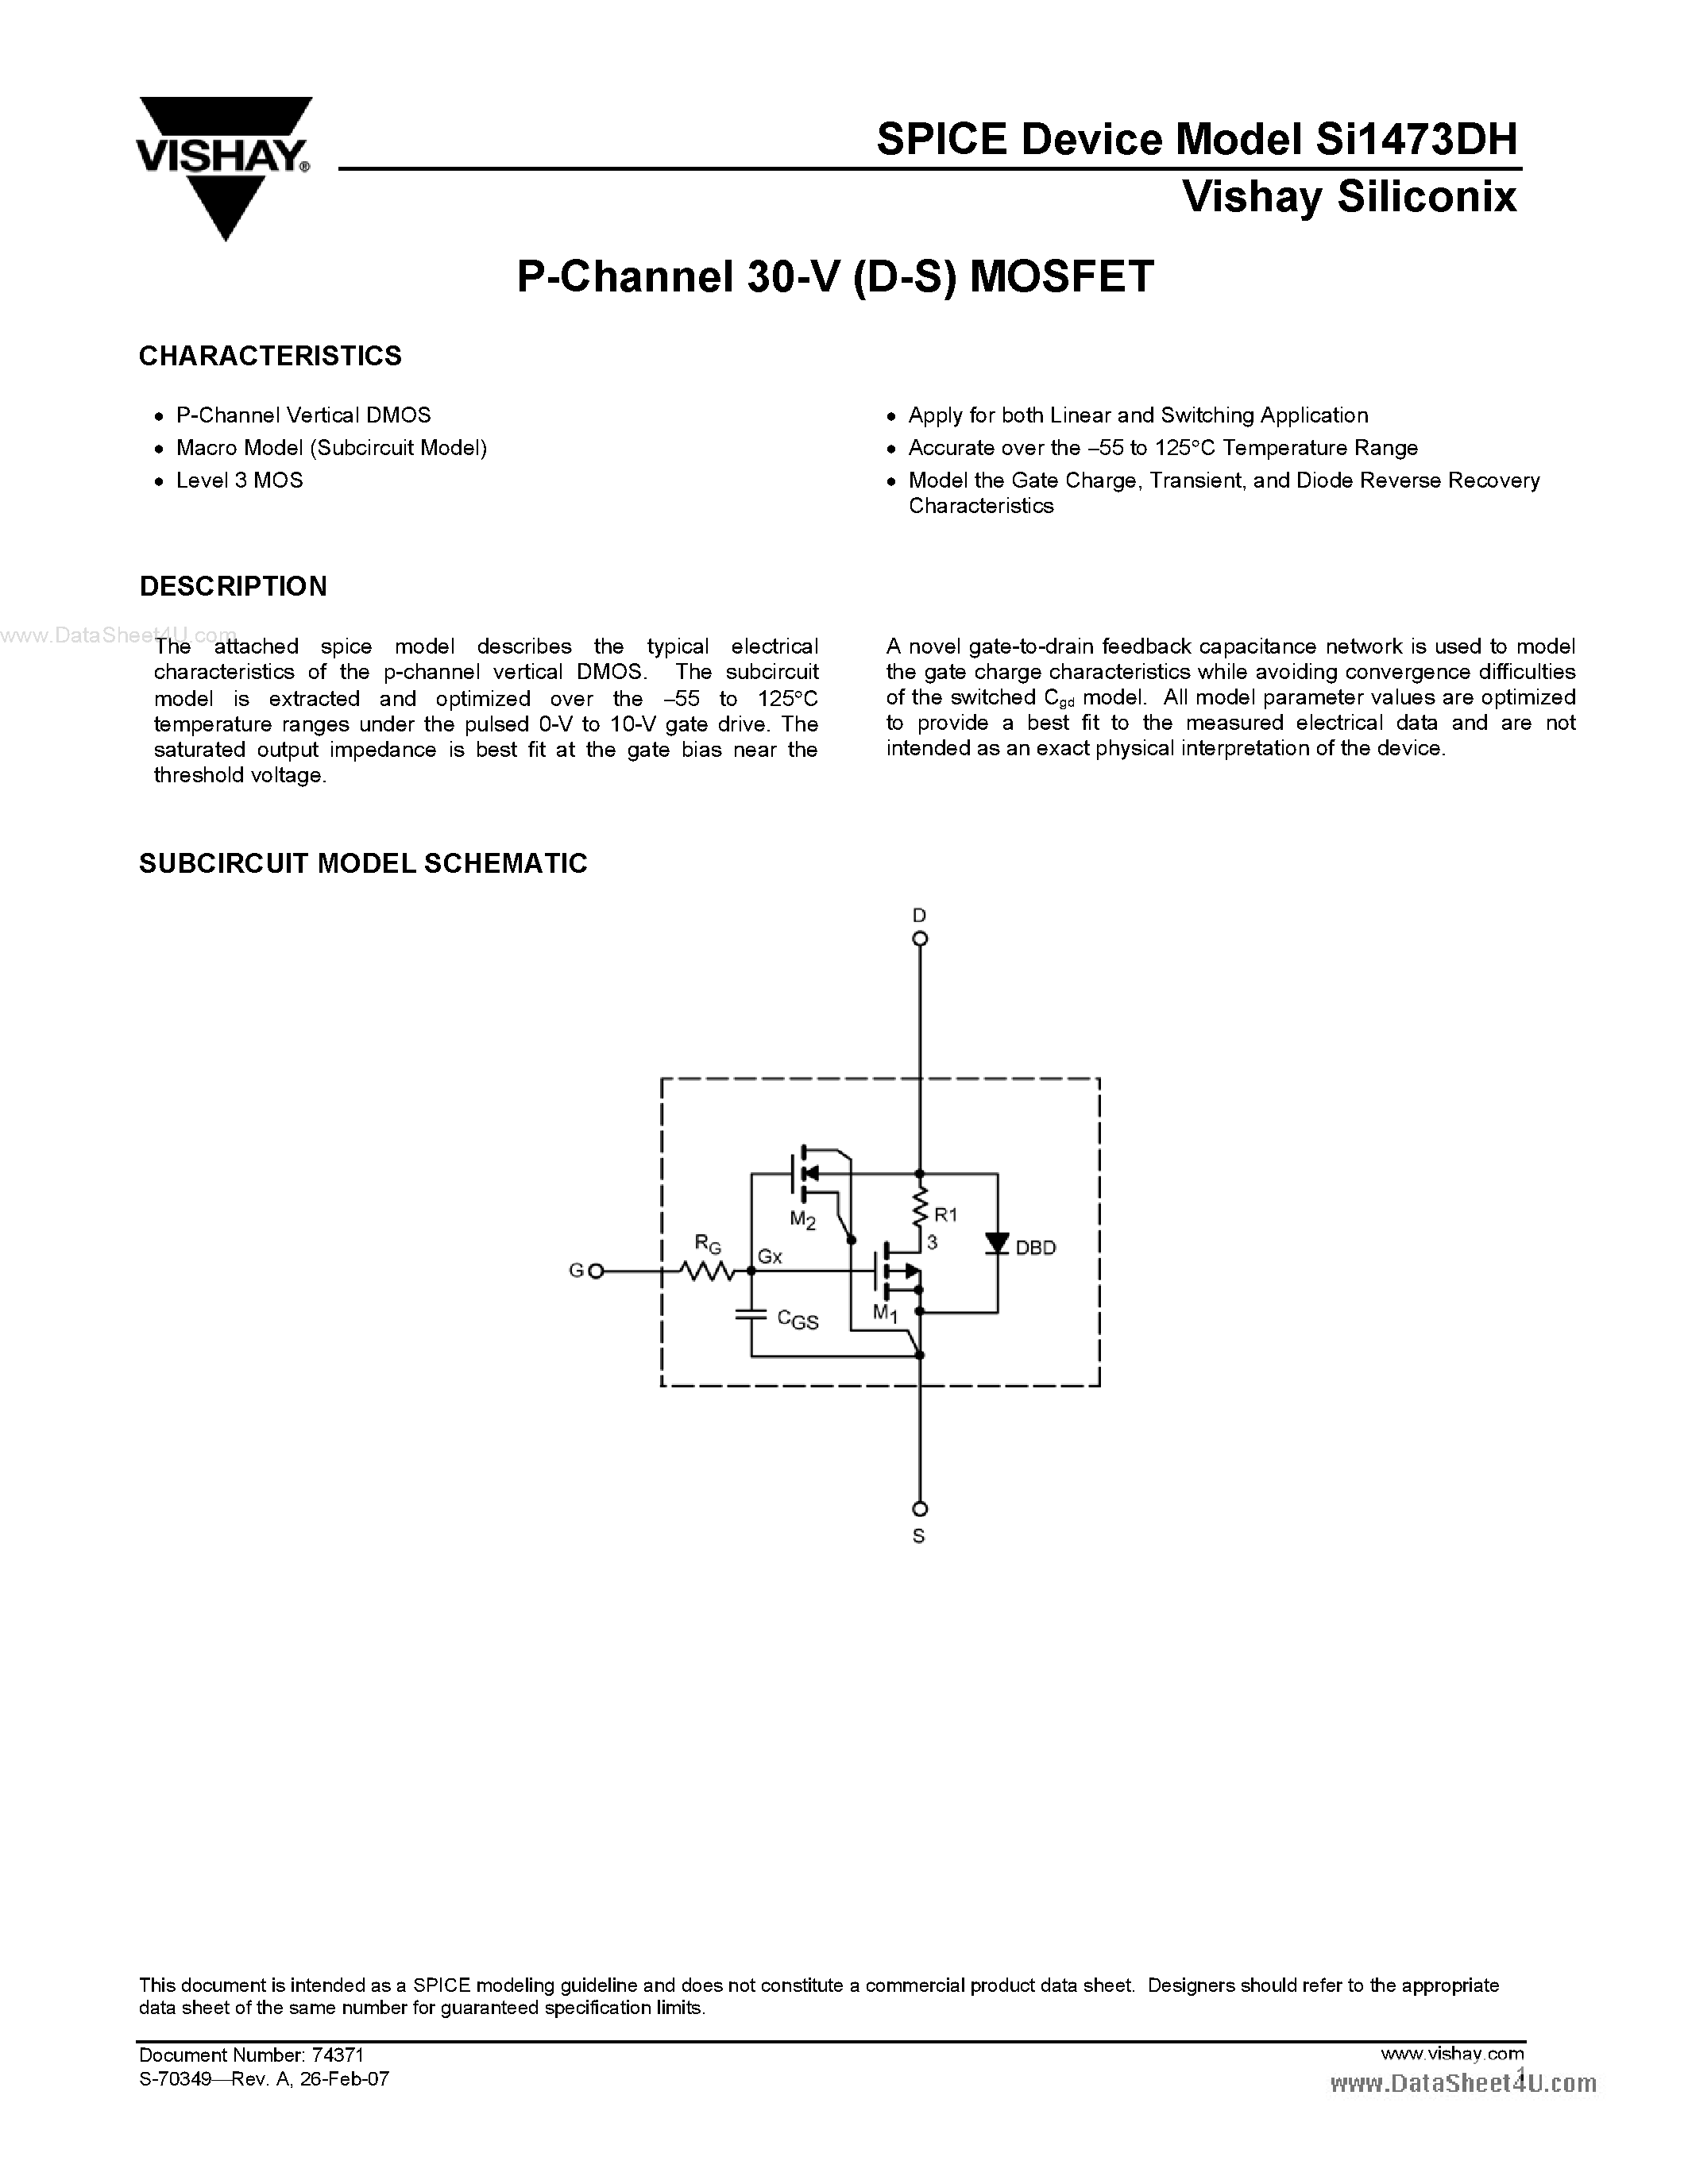 Datasheet SI1473DH - P-Channel MOSFET page 1